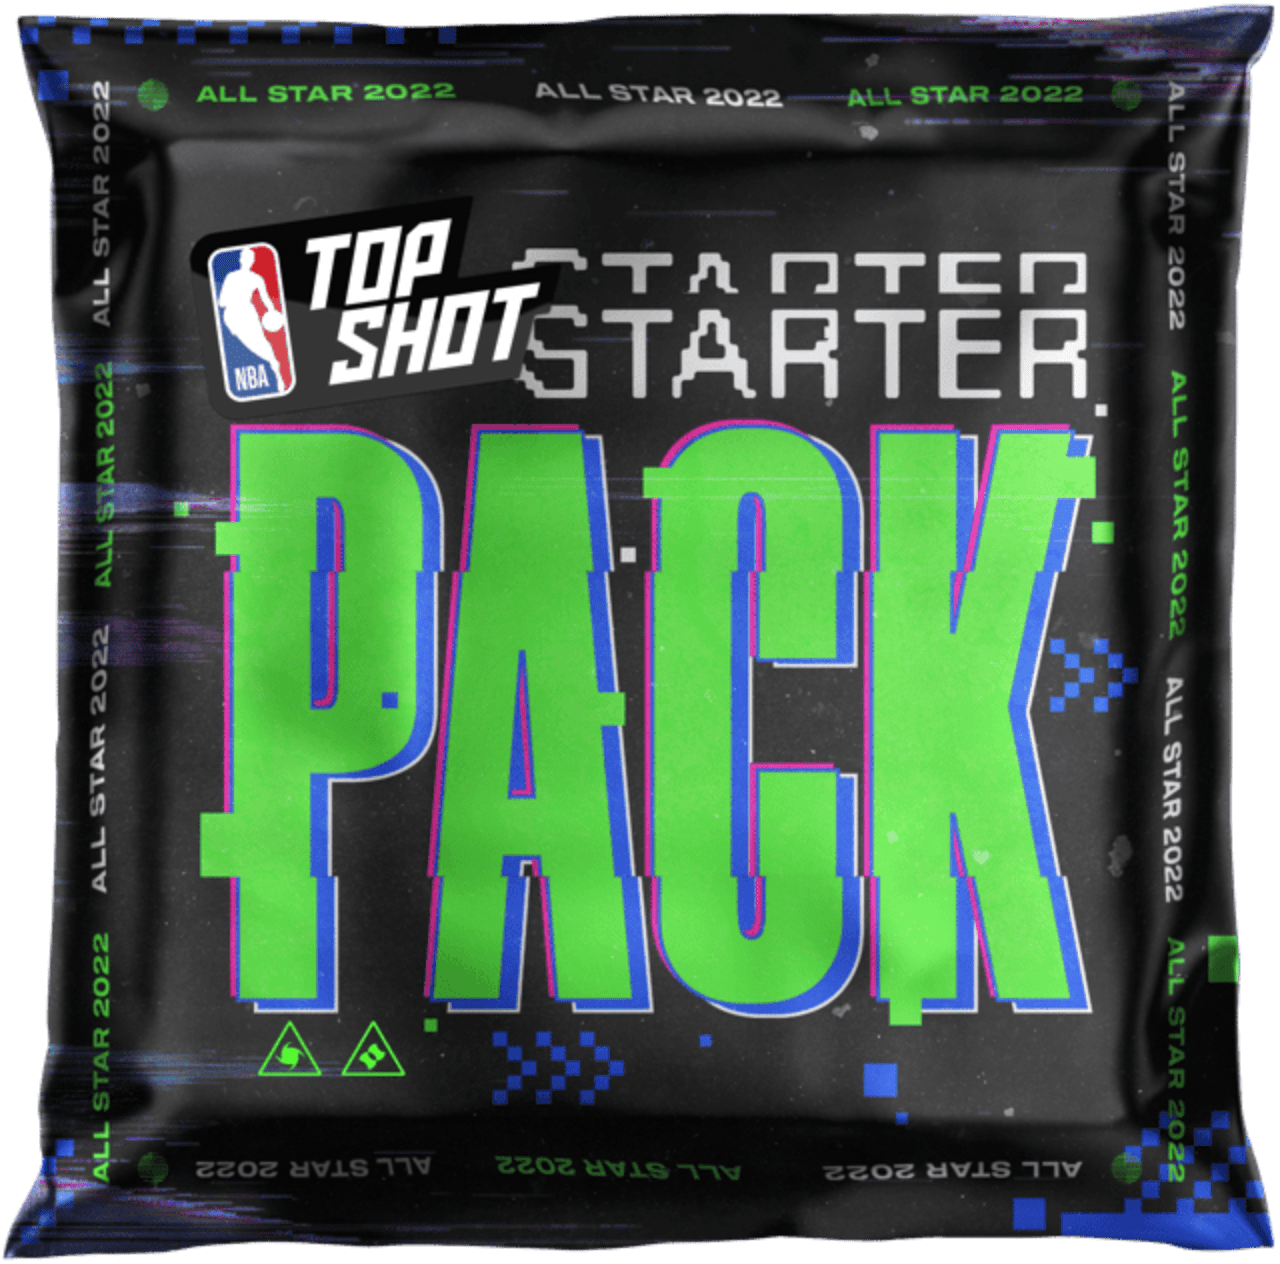 NBA Top Shot Starter Pack with basketball nft moments